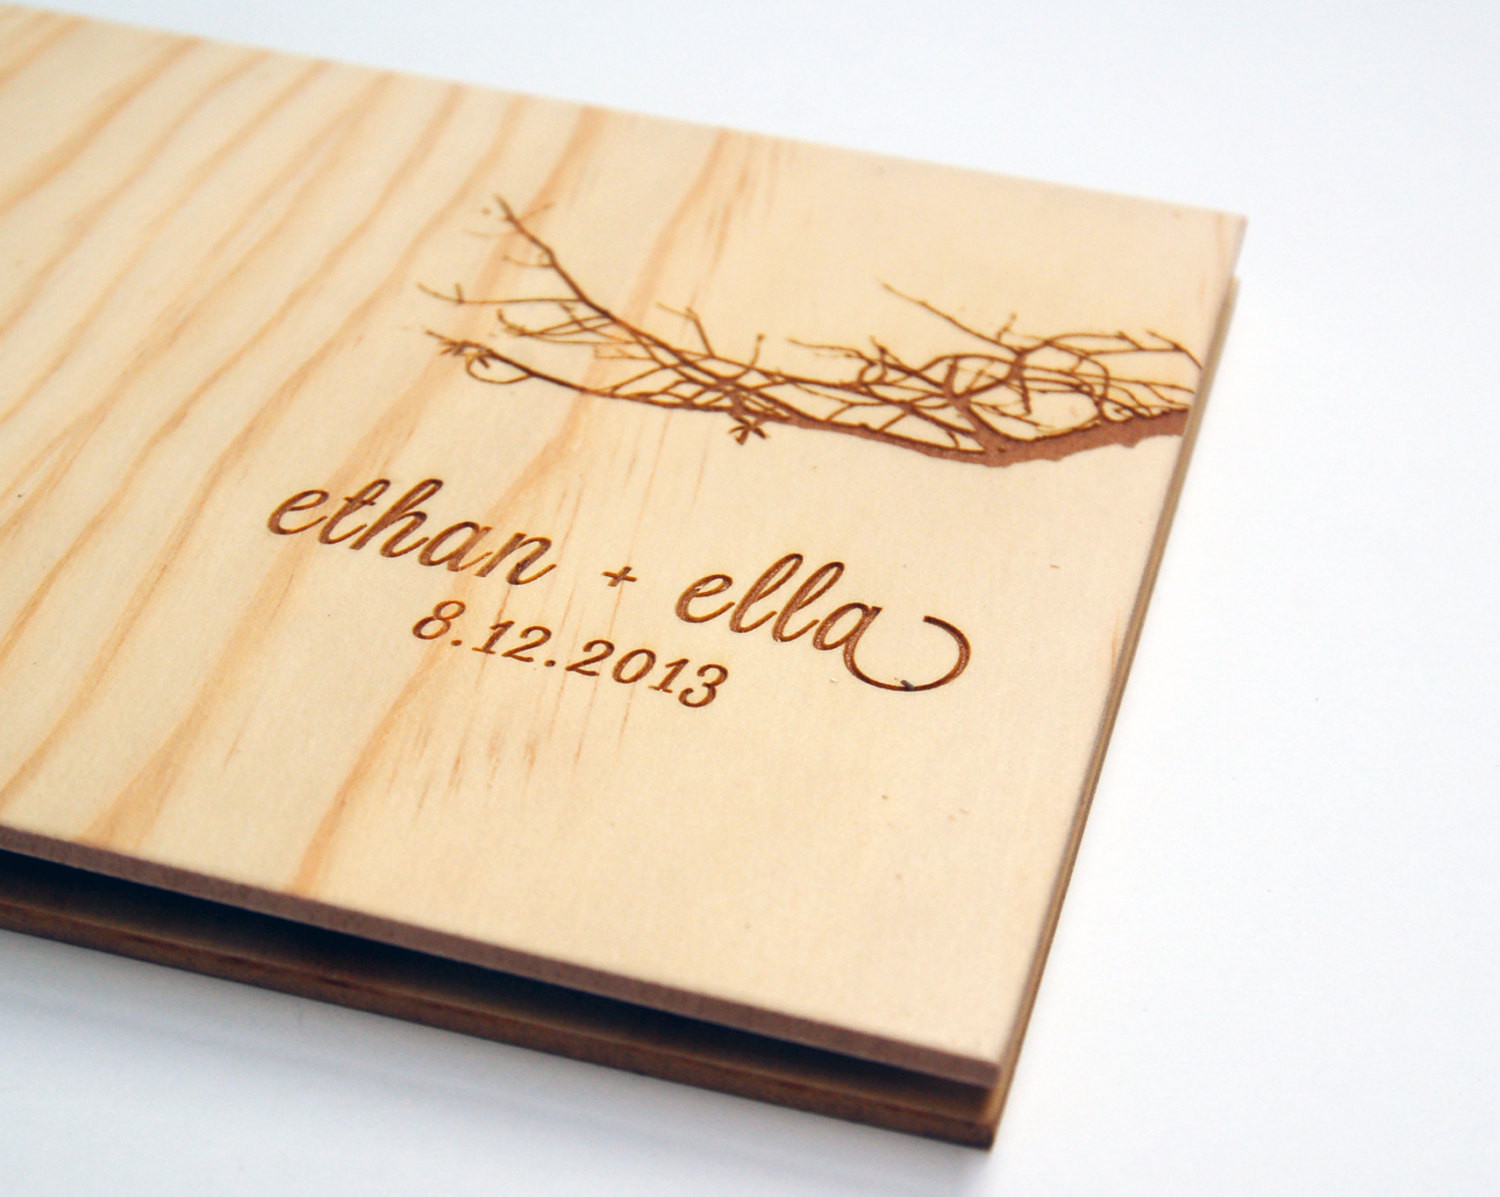 Personalized Guest Book For Wedding
 wedding guest book album custom wood engagement by lorgie